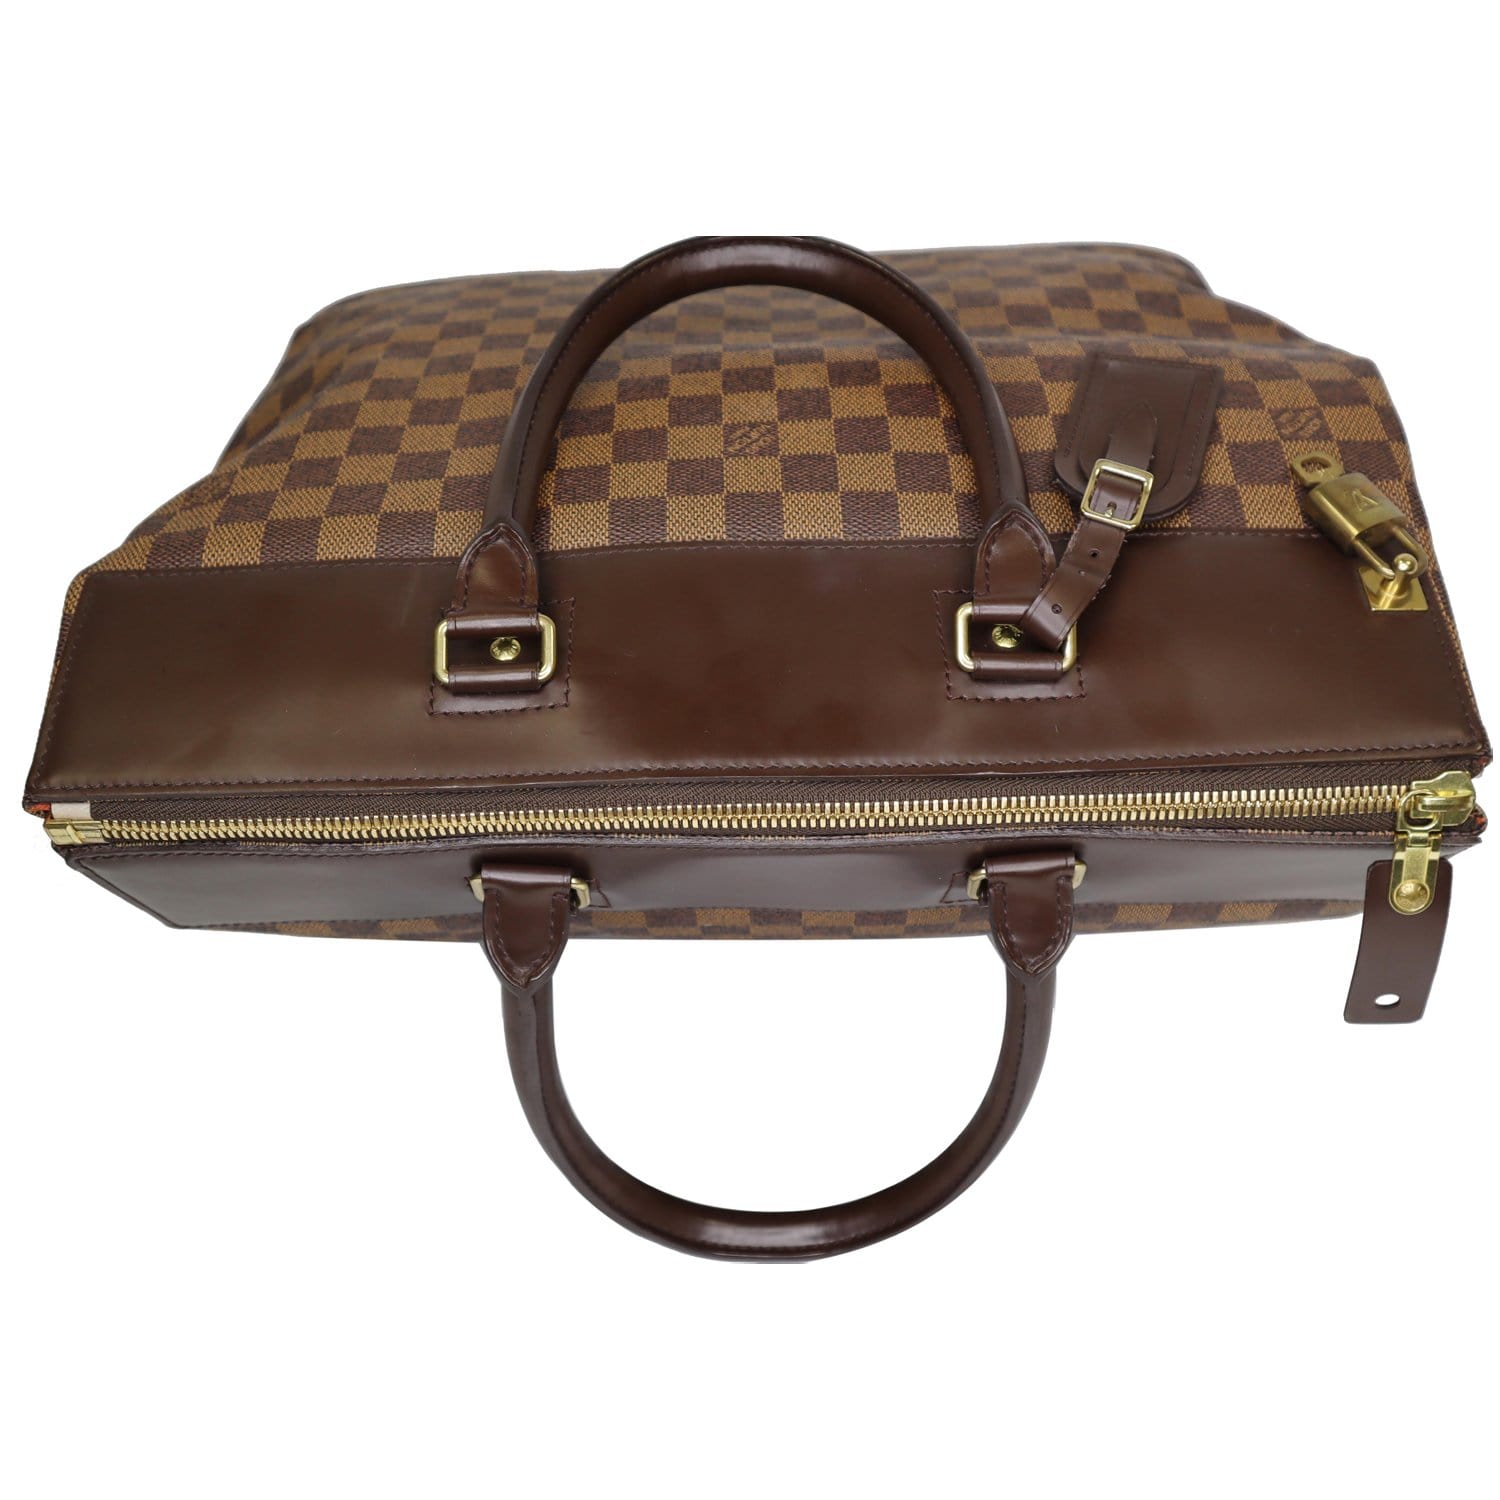 Louis Vuitton 2003 pre-owned Venice PM tote bag - Brown, £1285.00